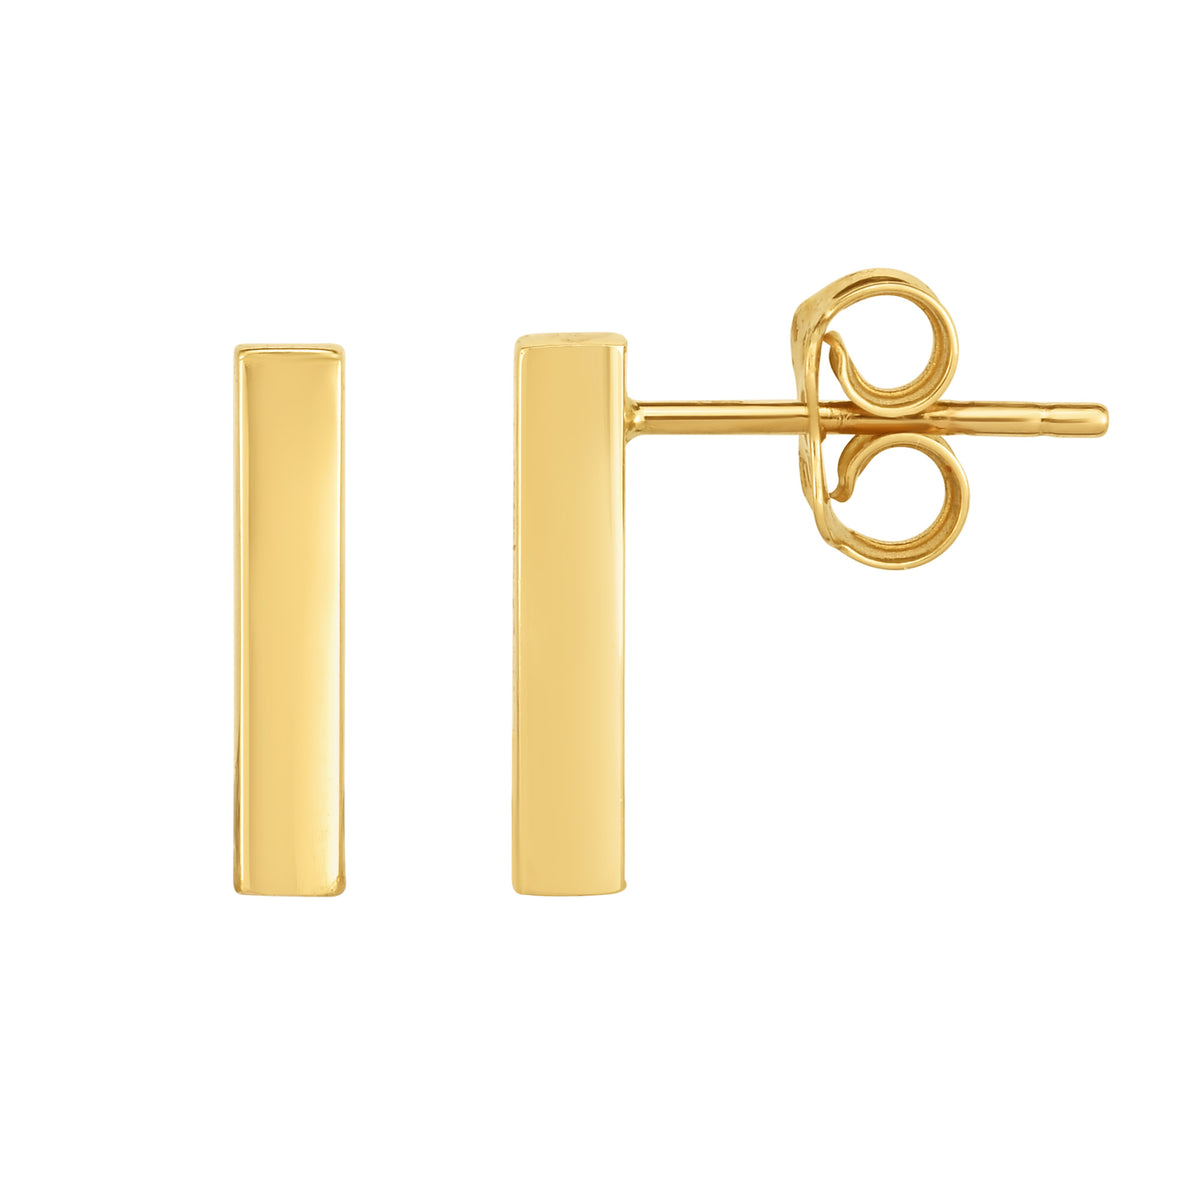 14K Gold Yellow Bar Square Tube Style Stud Earrings fine designer jewelry for men and women